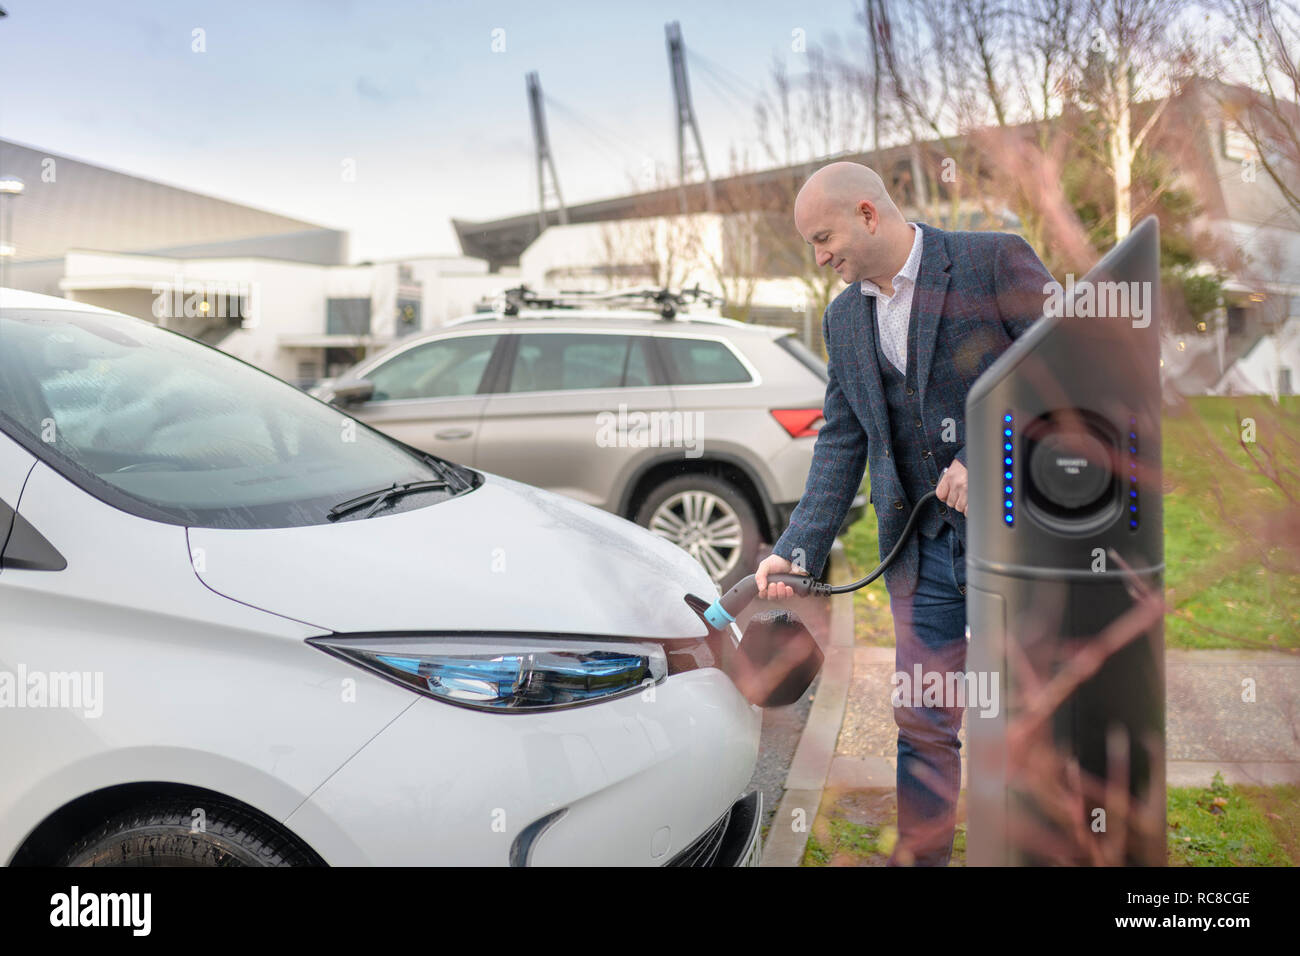 Businessman plugging in electric car at charging point, Manchester, UK Stock Photo